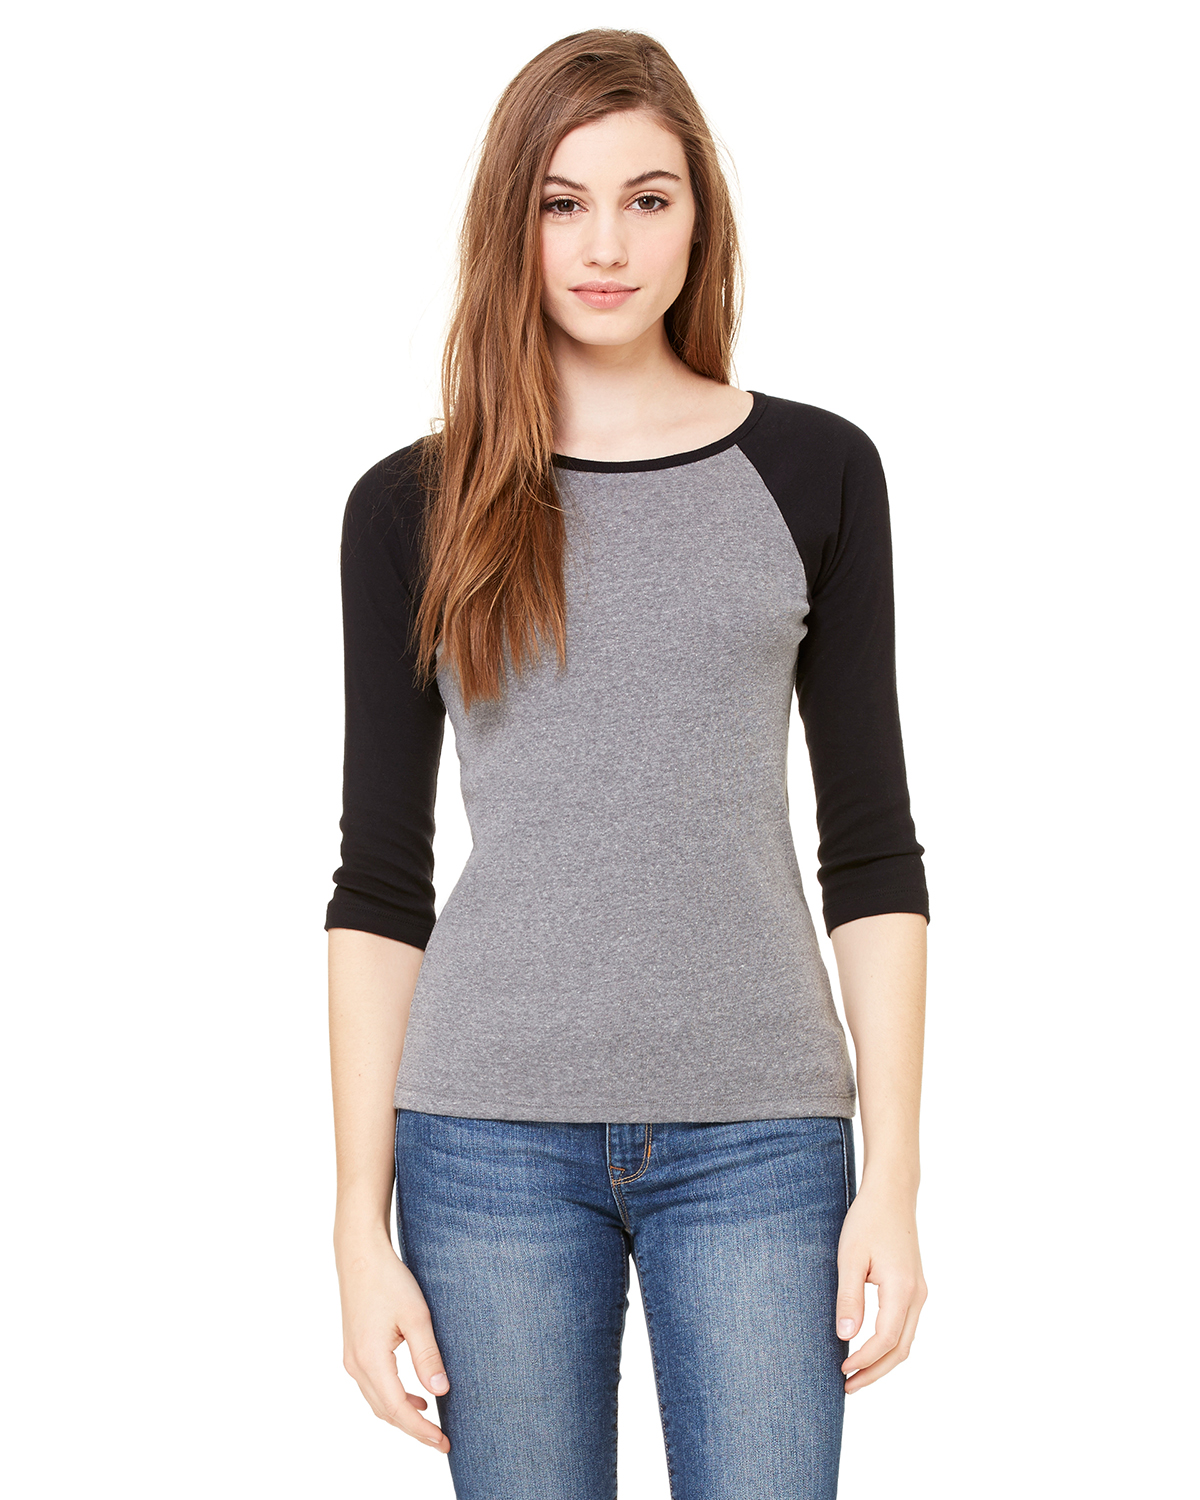 click to view Deep Heather/Black